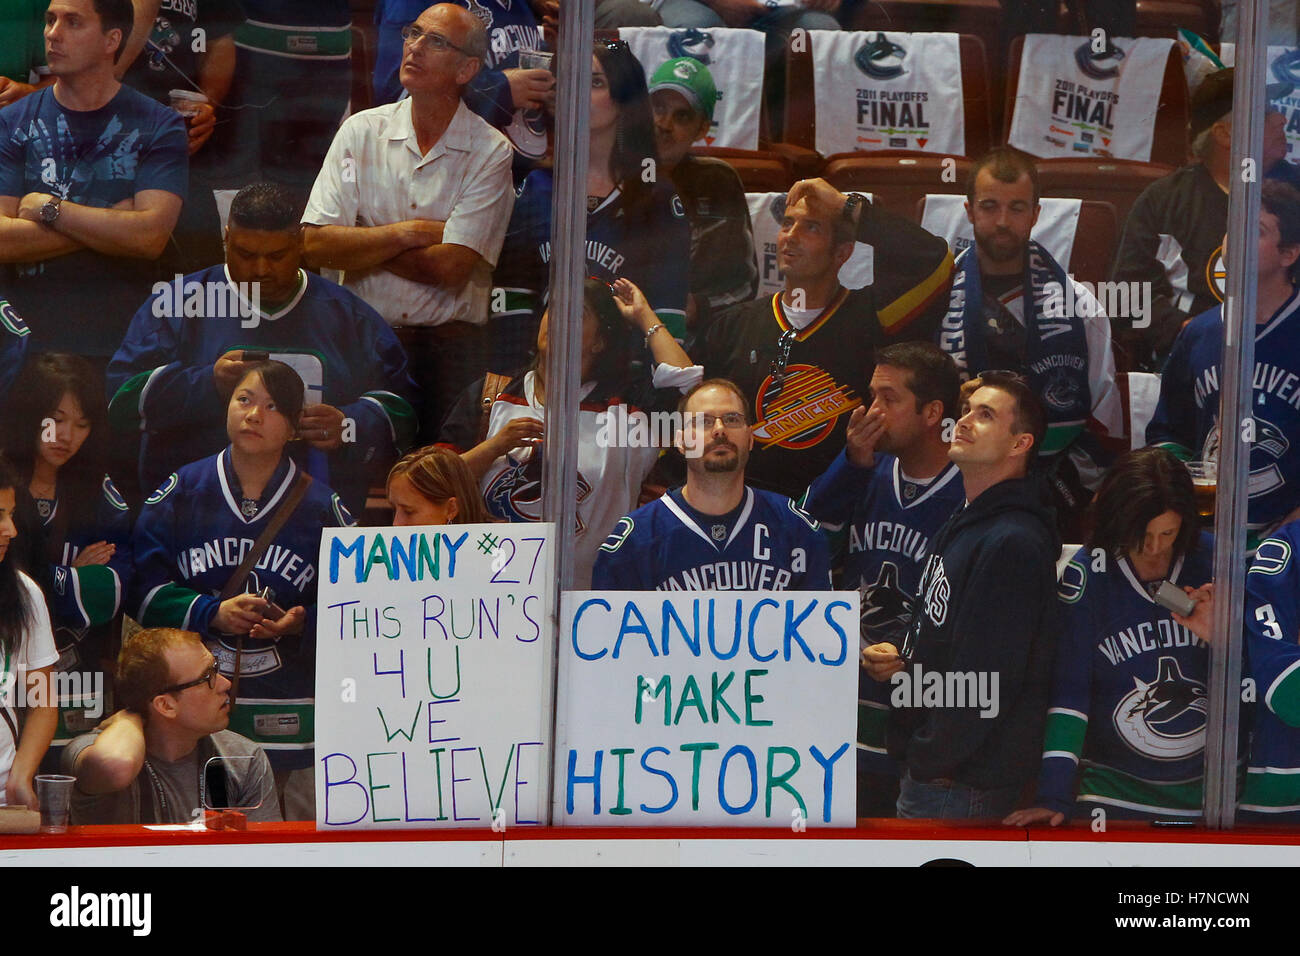 Vancouver Canucks - We miss seeing #Canucks fans and your signs in